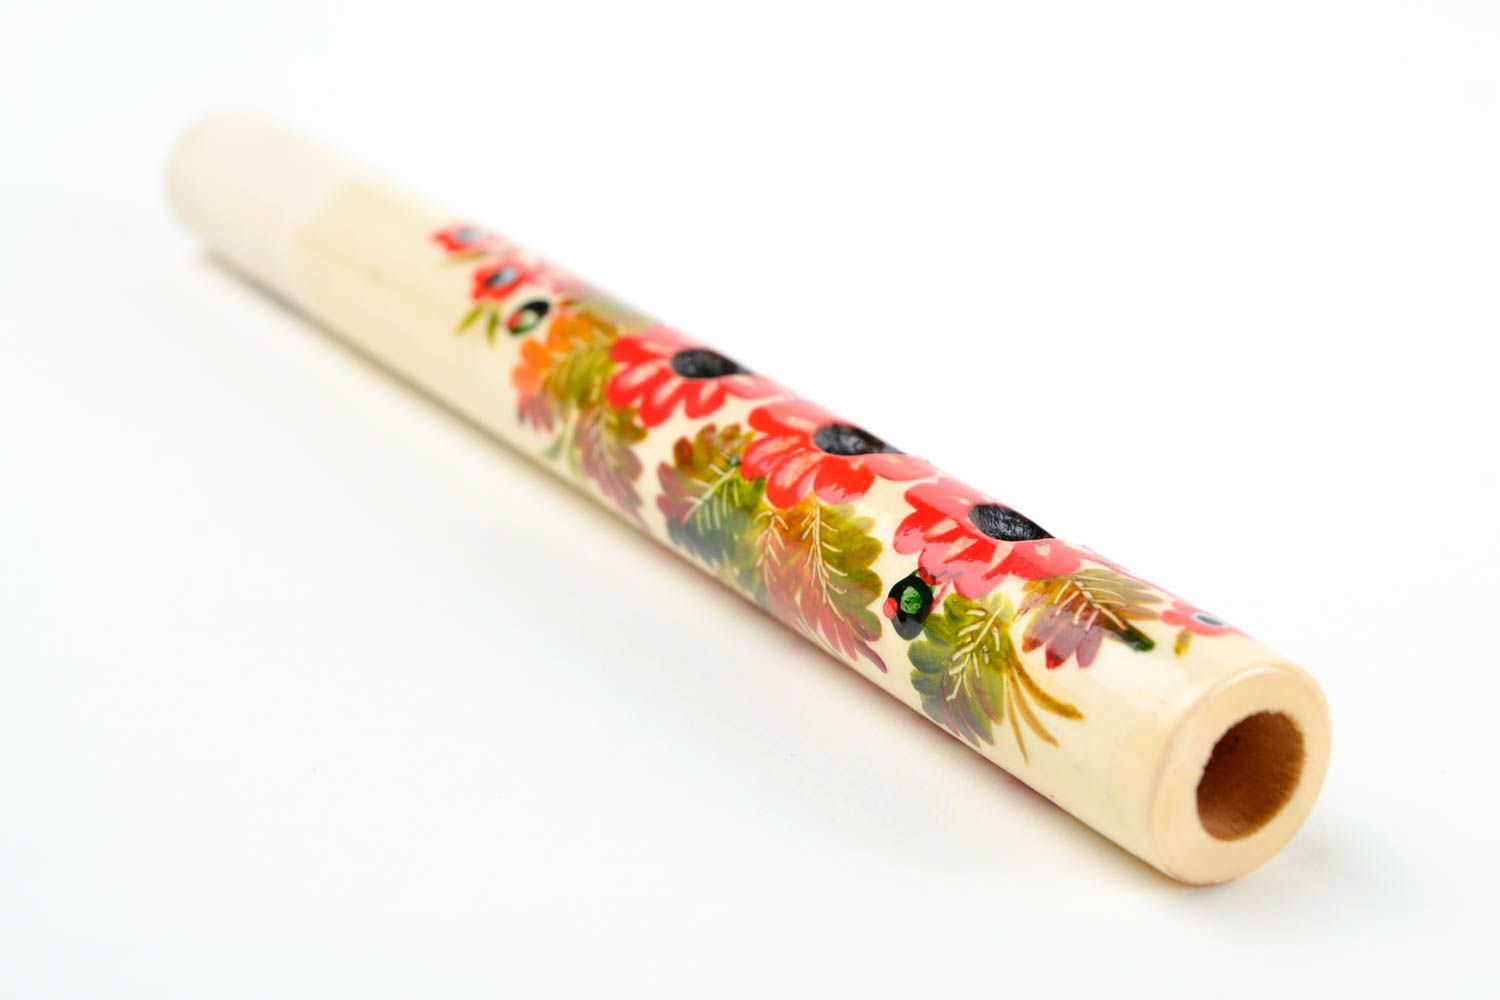 Handmade penny whistle wooden flute decorative use only unusual souvenir photo 4